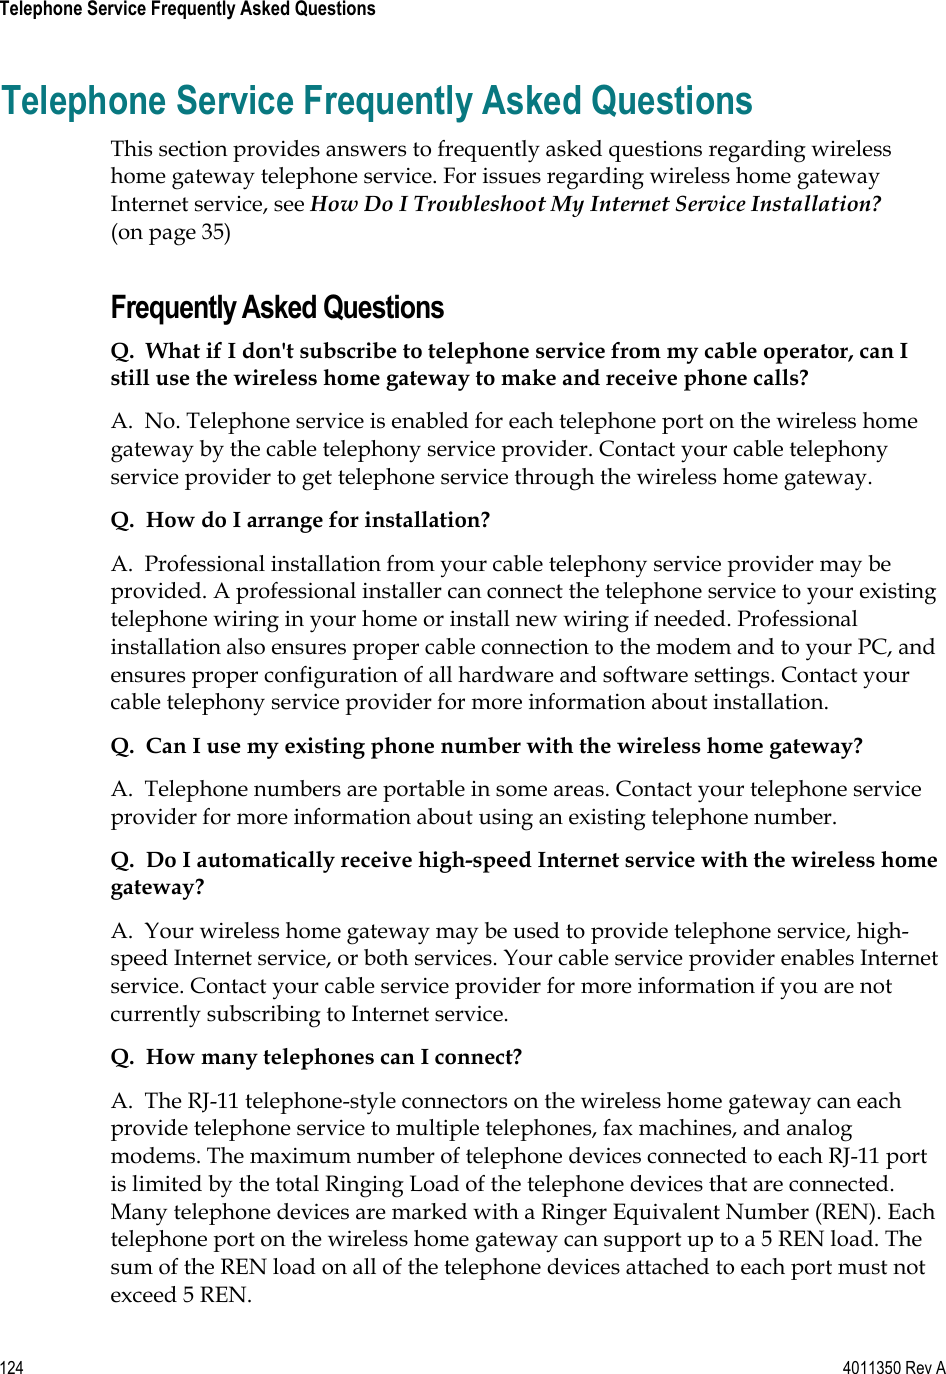 124    4011350 Rev A Telephone Service Frequently Asked Questions Telephone Service Frequently Asked Questions This section provides answers to frequently asked questions regarding wireless home gateway telephone service. For issues regarding wireless home gateway Internet service, see How Do I Troubleshoot My Internet Service Installation?(on page 35) Frequently Asked Questions Q.  What if I don&apos;t subscribe to telephone service from my cable operator, can I still use the wireless home gateway to make and receive phone calls?A.  No. Telephone service is enabled for each telephone port on the wireless home gateway by the cable telephony service provider. Contact your cable telephony service provider to get telephone service through the wireless home gateway. Q.  How do I arrange for installation?A.  Professional installation from your cable telephony service provider may be provided. A professional installer can connect the telephone service to your existing telephone wiring in your home or install new wiring if needed. Professional installation also ensures proper cable connection to the modem and to your PC, and ensures proper configuration of all hardware and software settings. Contact your cable telephony service provider for more information about installation. Q.  Can I use my existing phone number with the wireless home gateway?A.  Telephone numbers are portable in some areas. Contact your telephone service provider for more information about using an existing telephone number. Q.  Do I automatically receive high-speed Internet service with the wireless home gateway?A.  Your wireless home gateway may be used to provide telephone service, high-speed Internet service, or both services. Your cable service provider enables Internet service. Contact your cable service provider for more information if you are not currently subscribing to Internet service. Q.  How many telephones can I connect?A.  The RJ-11 telephone-style connectors on the wireless home gateway can each provide telephone service to multiple telephones, fax machines, and analog modems. The maximum number of telephone devices connected to each RJ-11 port is limited by the total Ringing Load of the telephone devices that are connected. Many telephone devices are marked with a Ringer Equivalent Number (REN). Each telephone port on the wireless home gateway can support up to a 5 REN load. The sum of the REN load on all of the telephone devices attached to each port must not exceed 5 REN. 